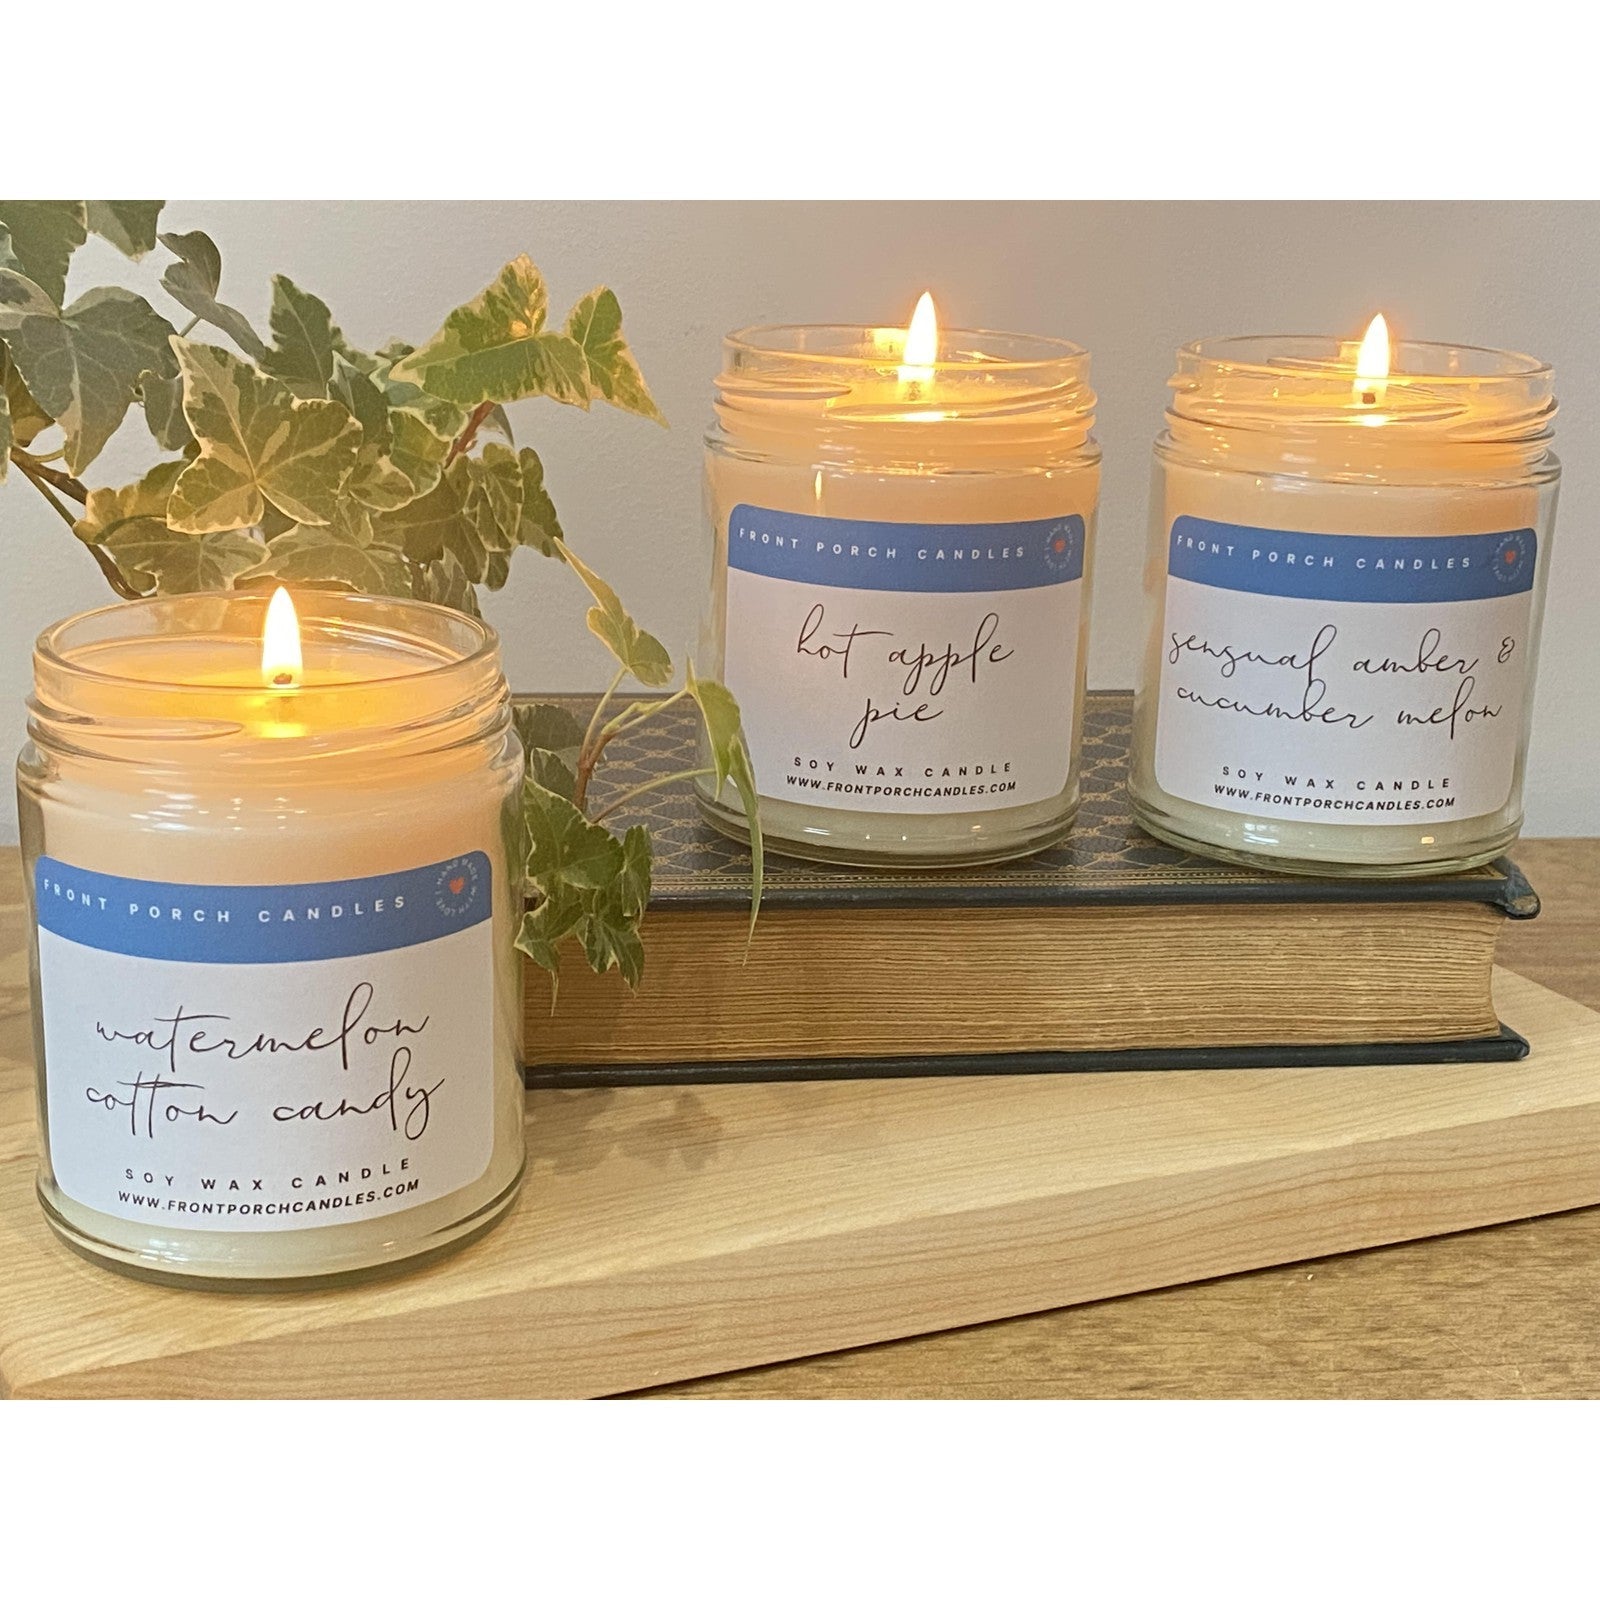 Beach Breeze- Aroma of summer Sand, warm Sun, sweet orange flowers and lemony citrus with undertones of clean, fresh lavender tones and powdery musk.Enjoy our beautiful and aromatic Soy Candles. Made with 100% Soy Wax and our Strong Fragrance Oils (candles may come in contact with other waxes in our facility). The color of the candle will vary in shades of white and yellow. Candles are approx. 8 fluid ounces each.BURNING INSTRUCTIONS:Keep wick centered and trimmed to 1/4" at all times- (never leave unattend